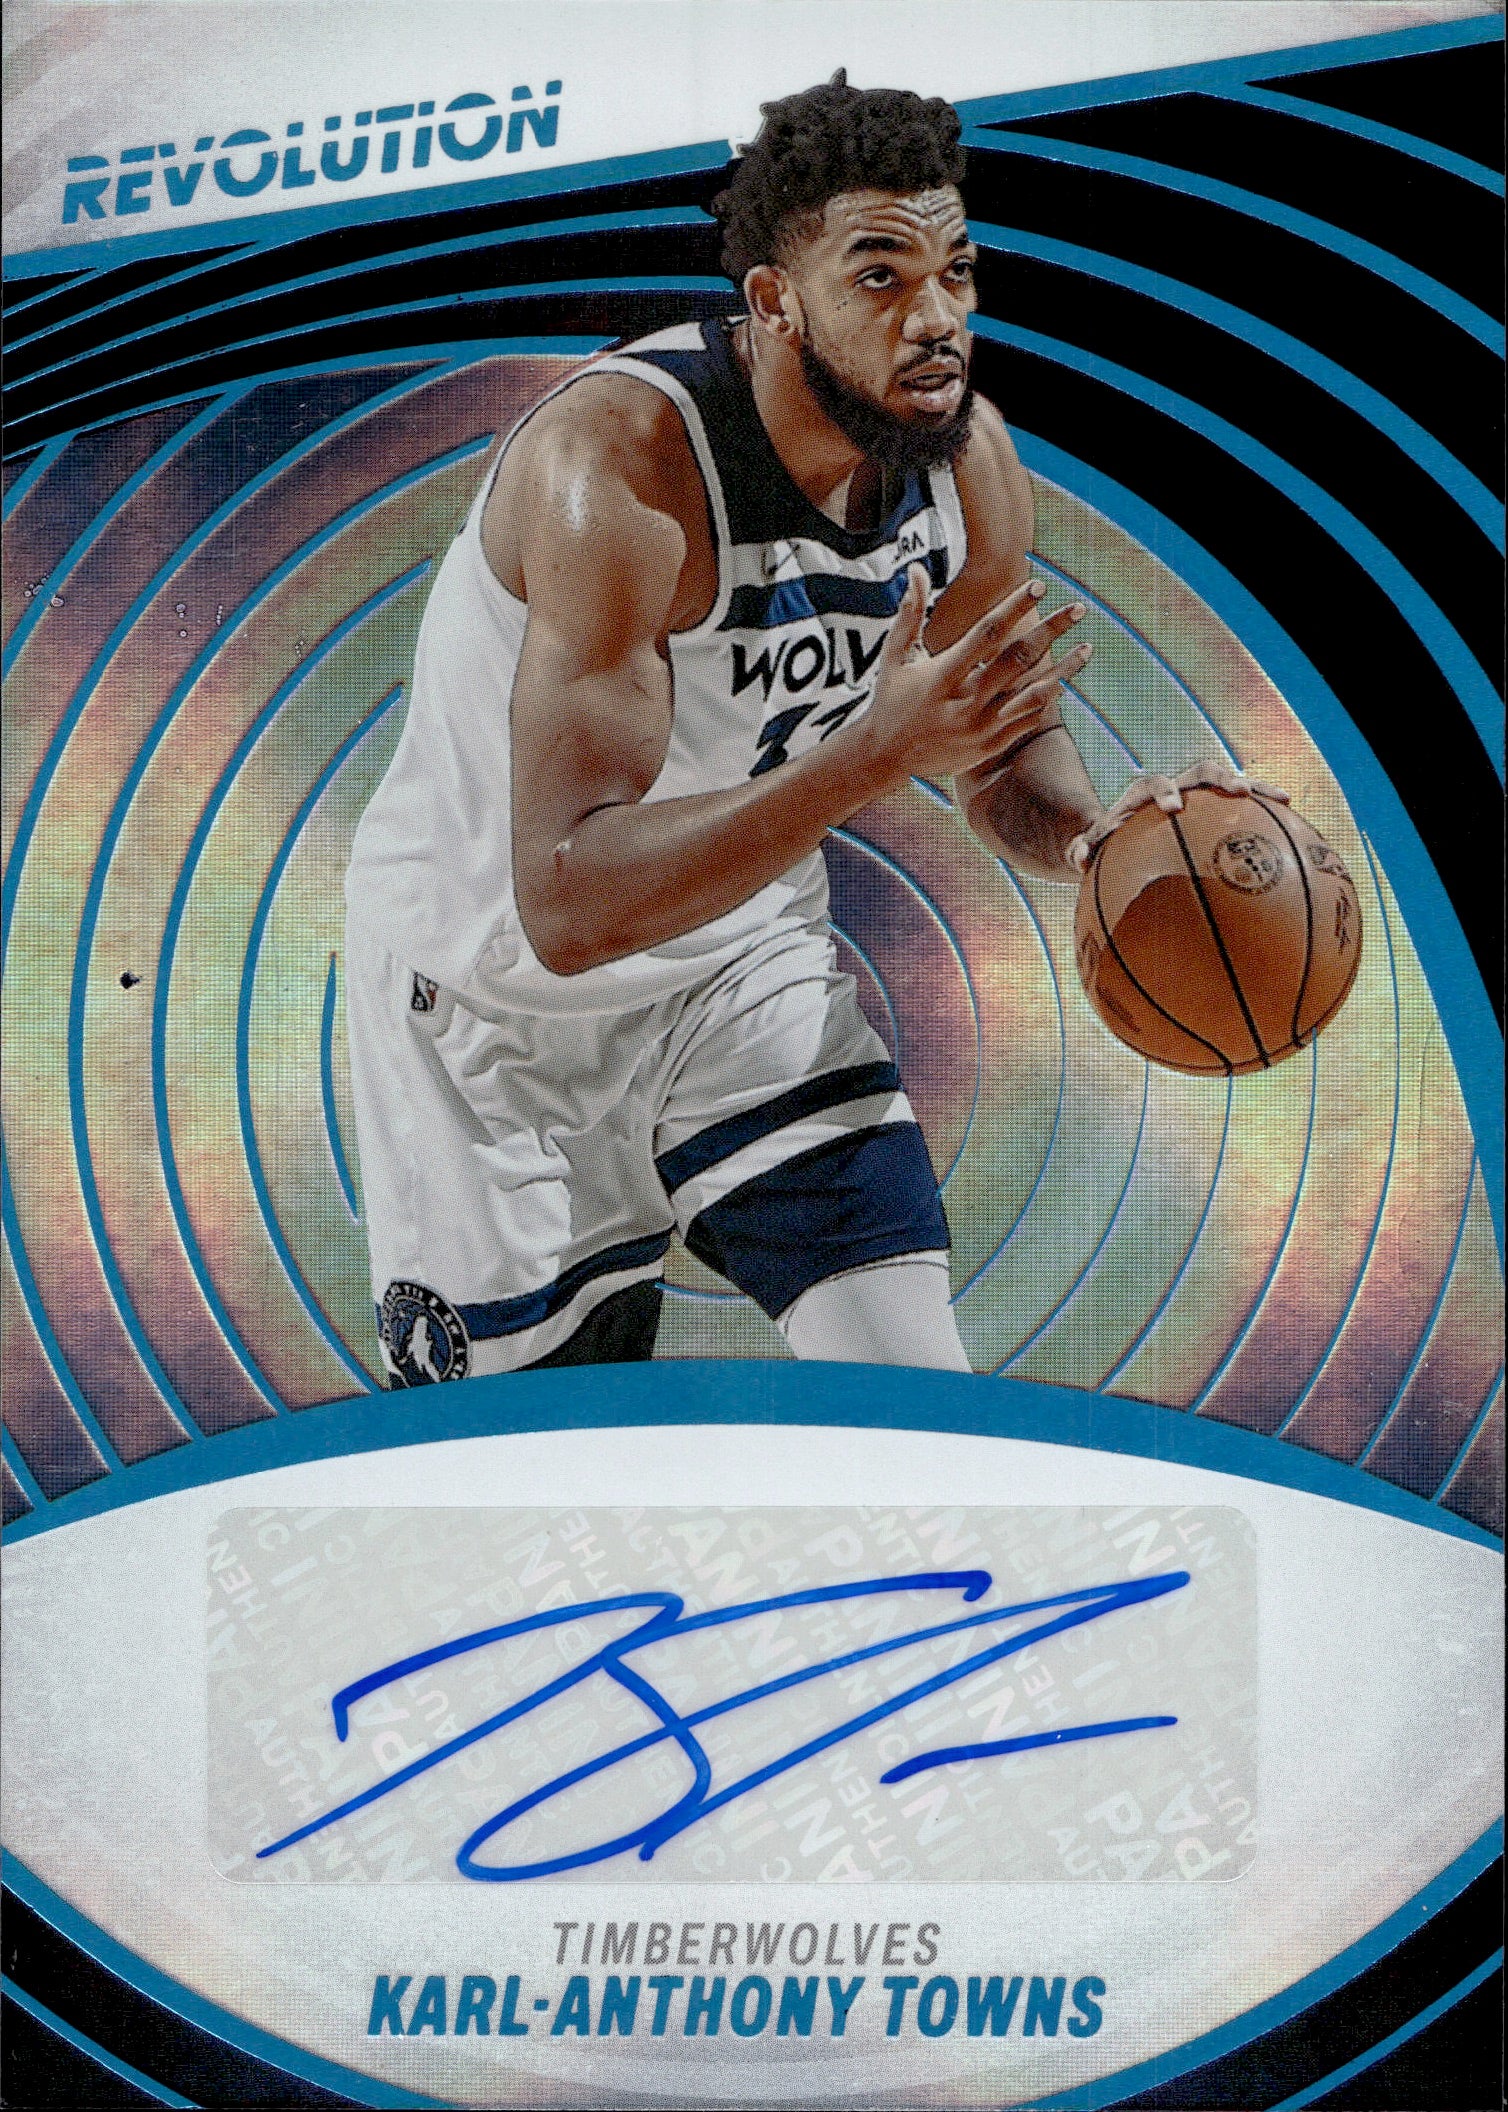 Karl-Anthony Towns Signed Game Ball Series Basketball (Fanatics Hologram)